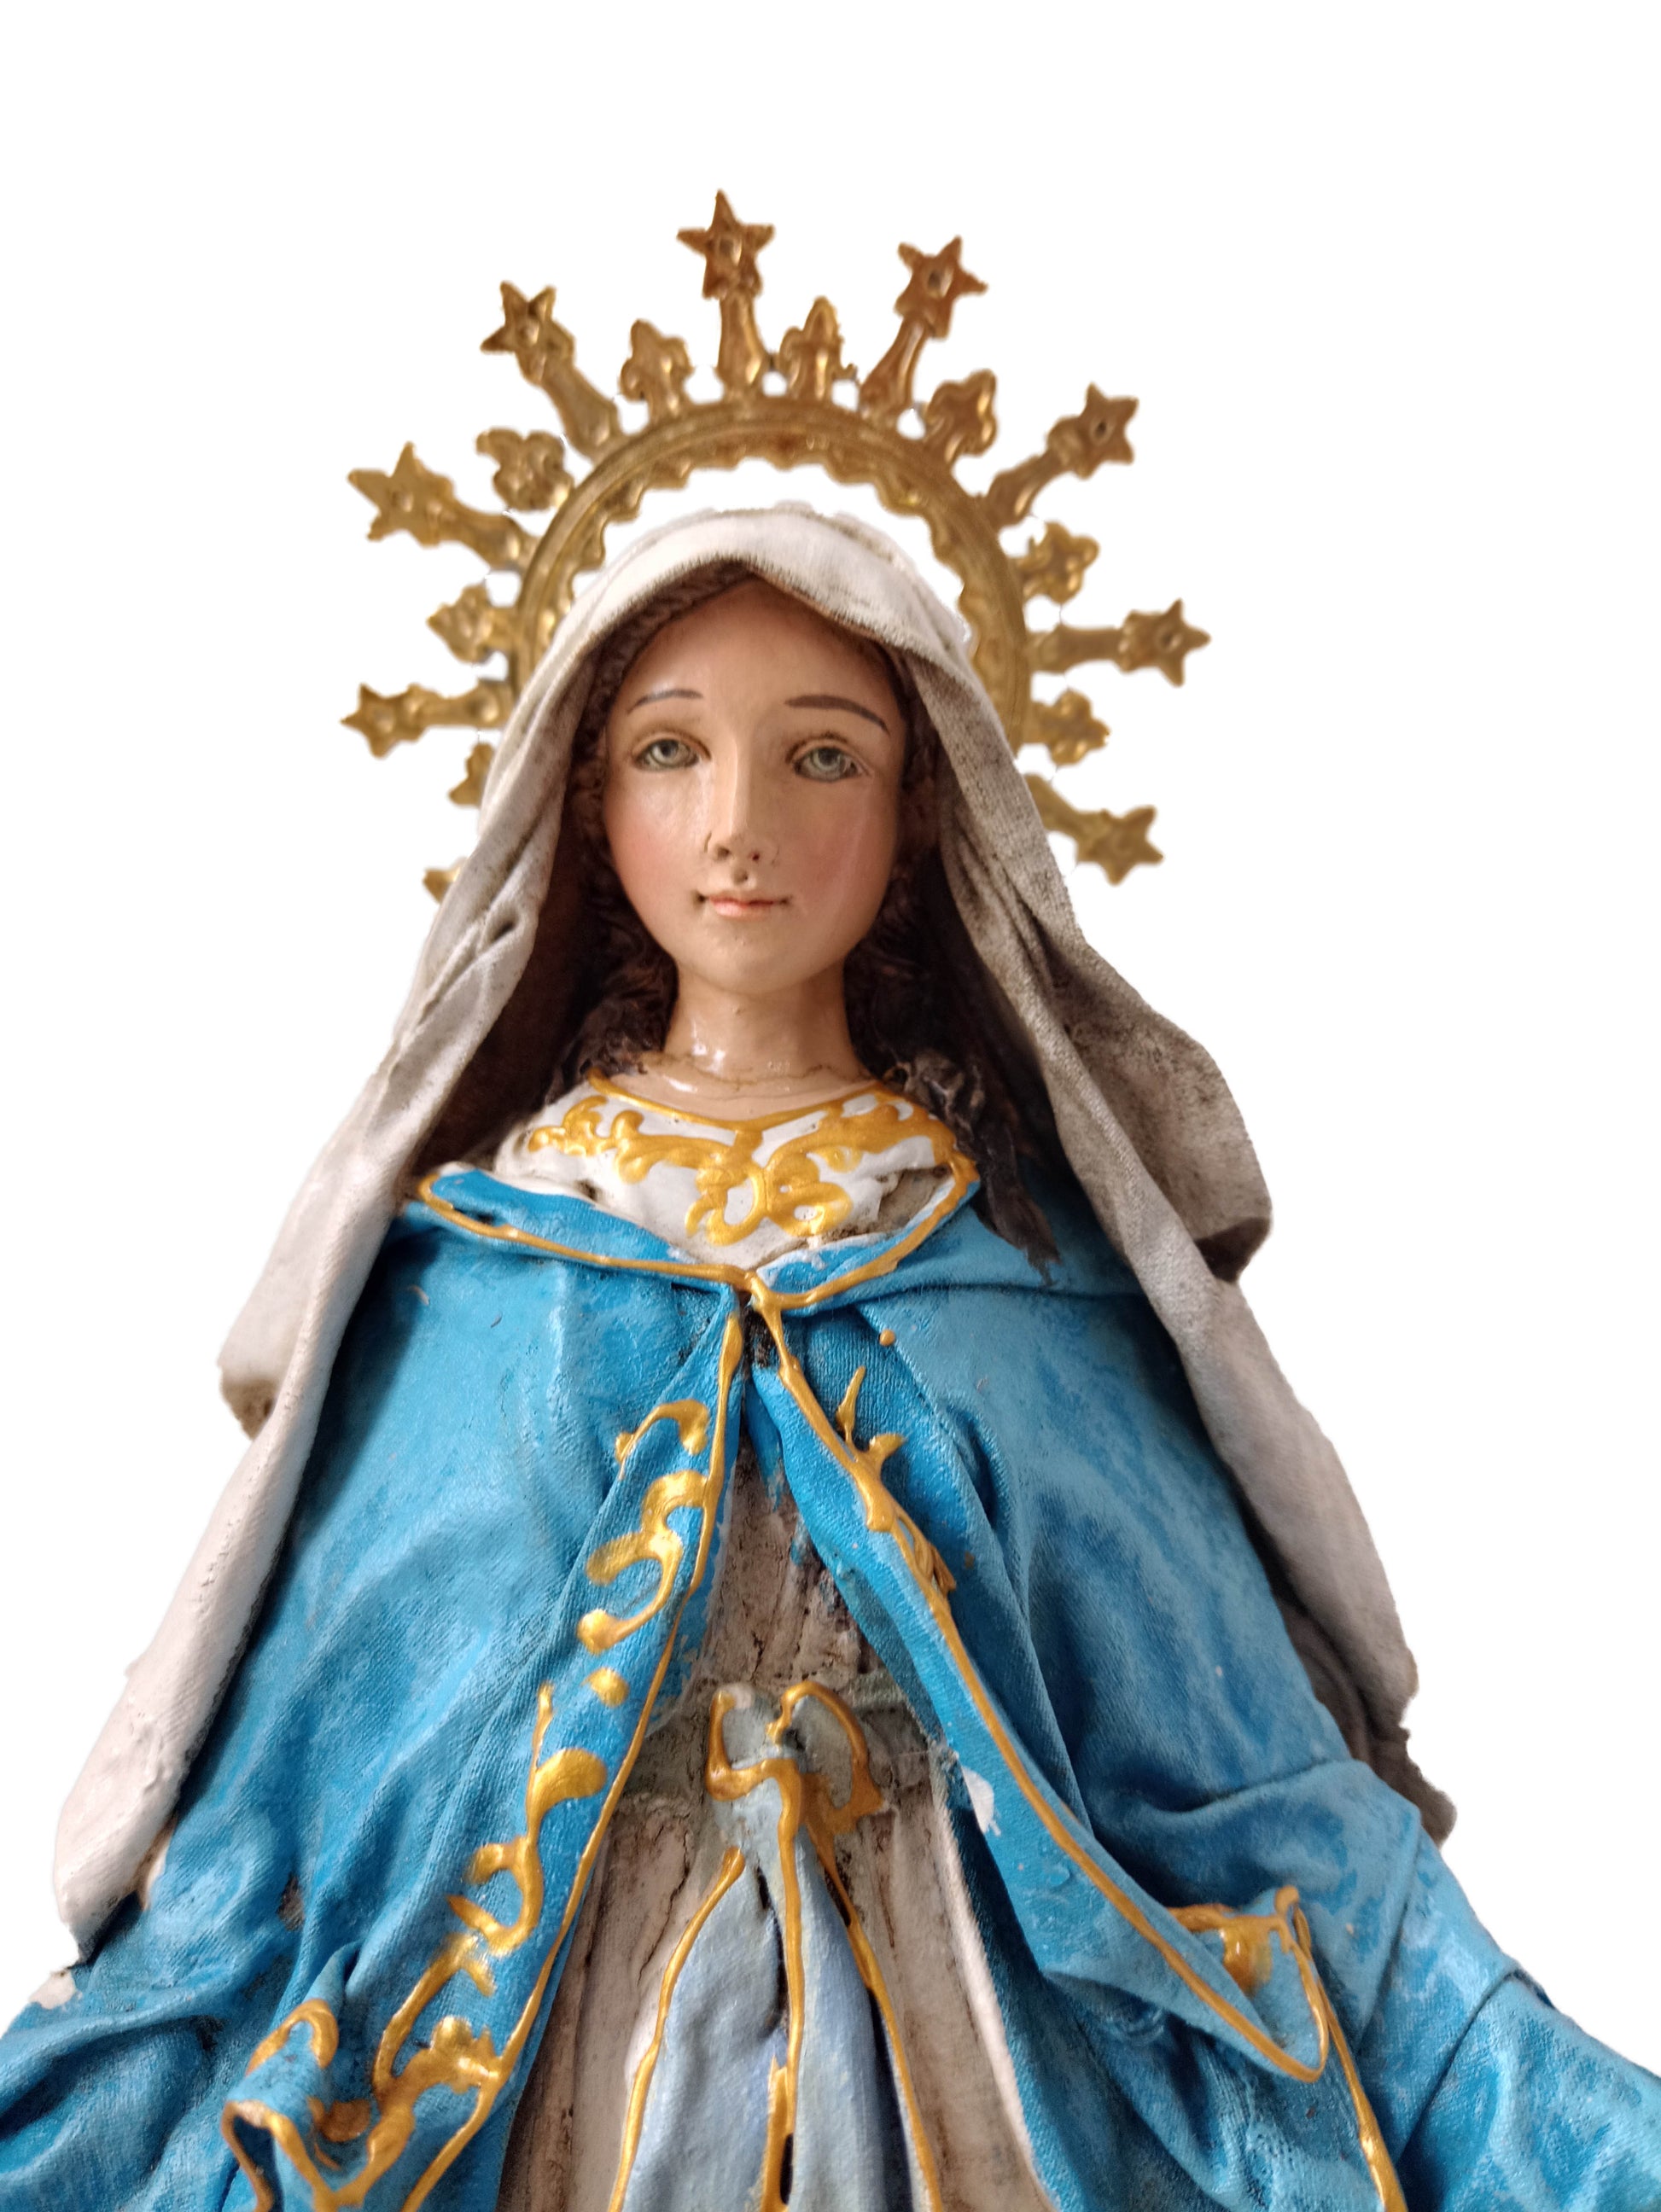 Our Lady of Miracles Handmade statue - catholic community services - kmnk deco